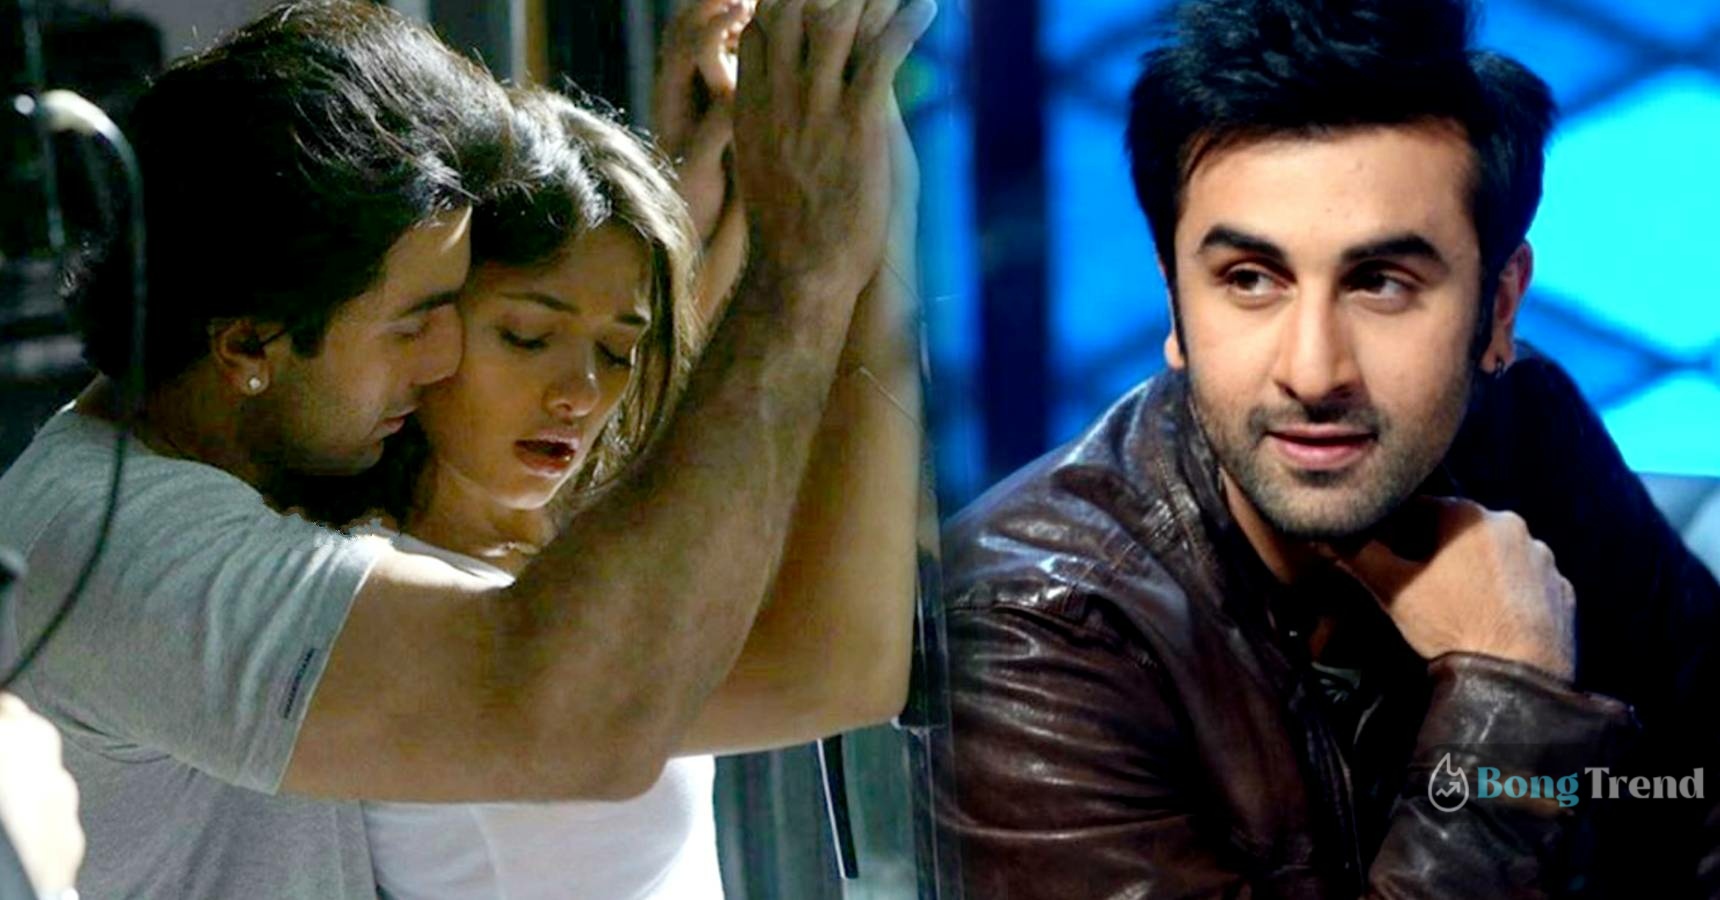 Bollywood actor Ranbir Kapoor once revealed he had sex with friends girlfriend and mothers friend